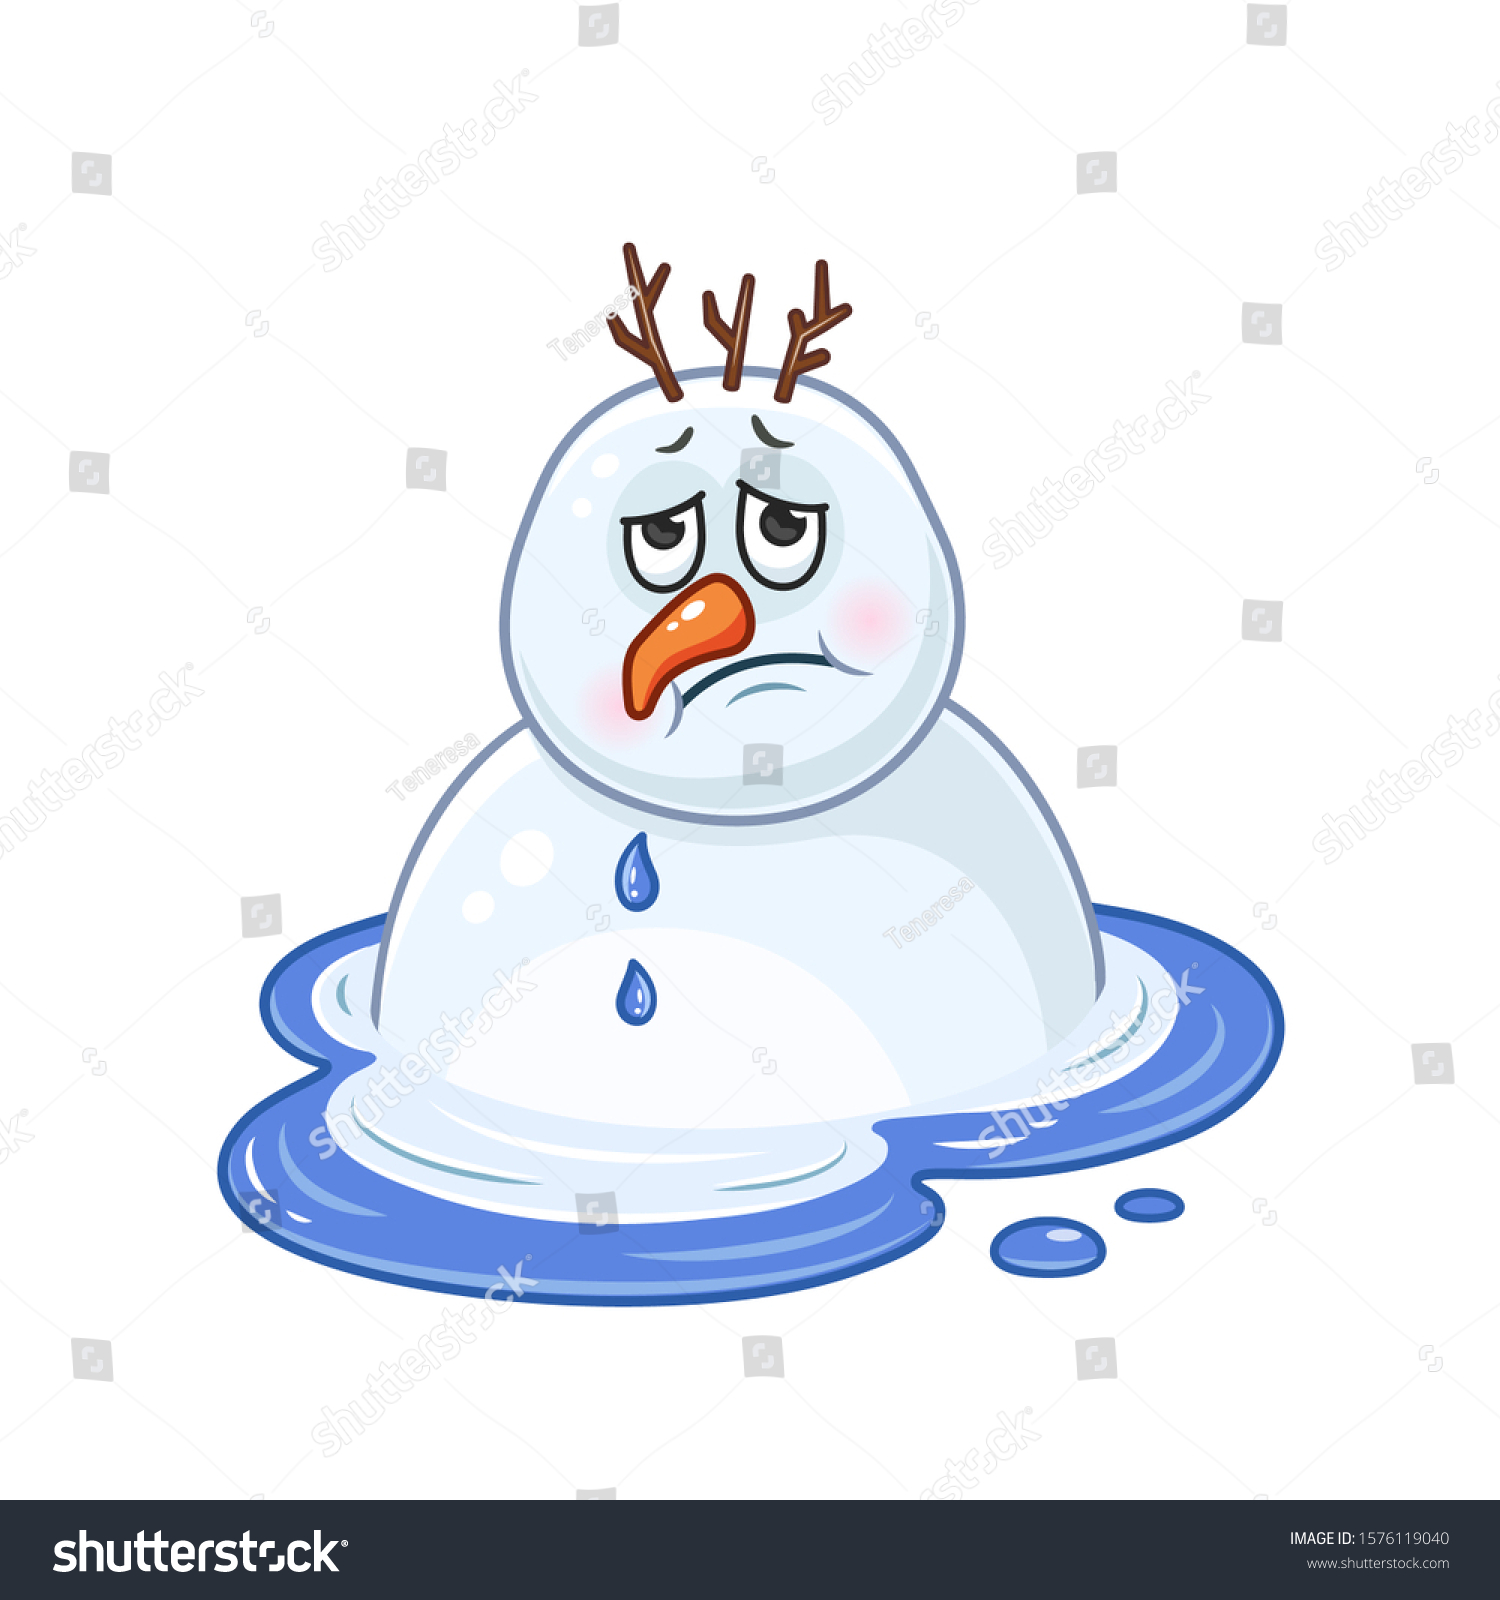 Melted Snowman Puddle Water Stock Vector (Royalty Free) 1576119040 ...